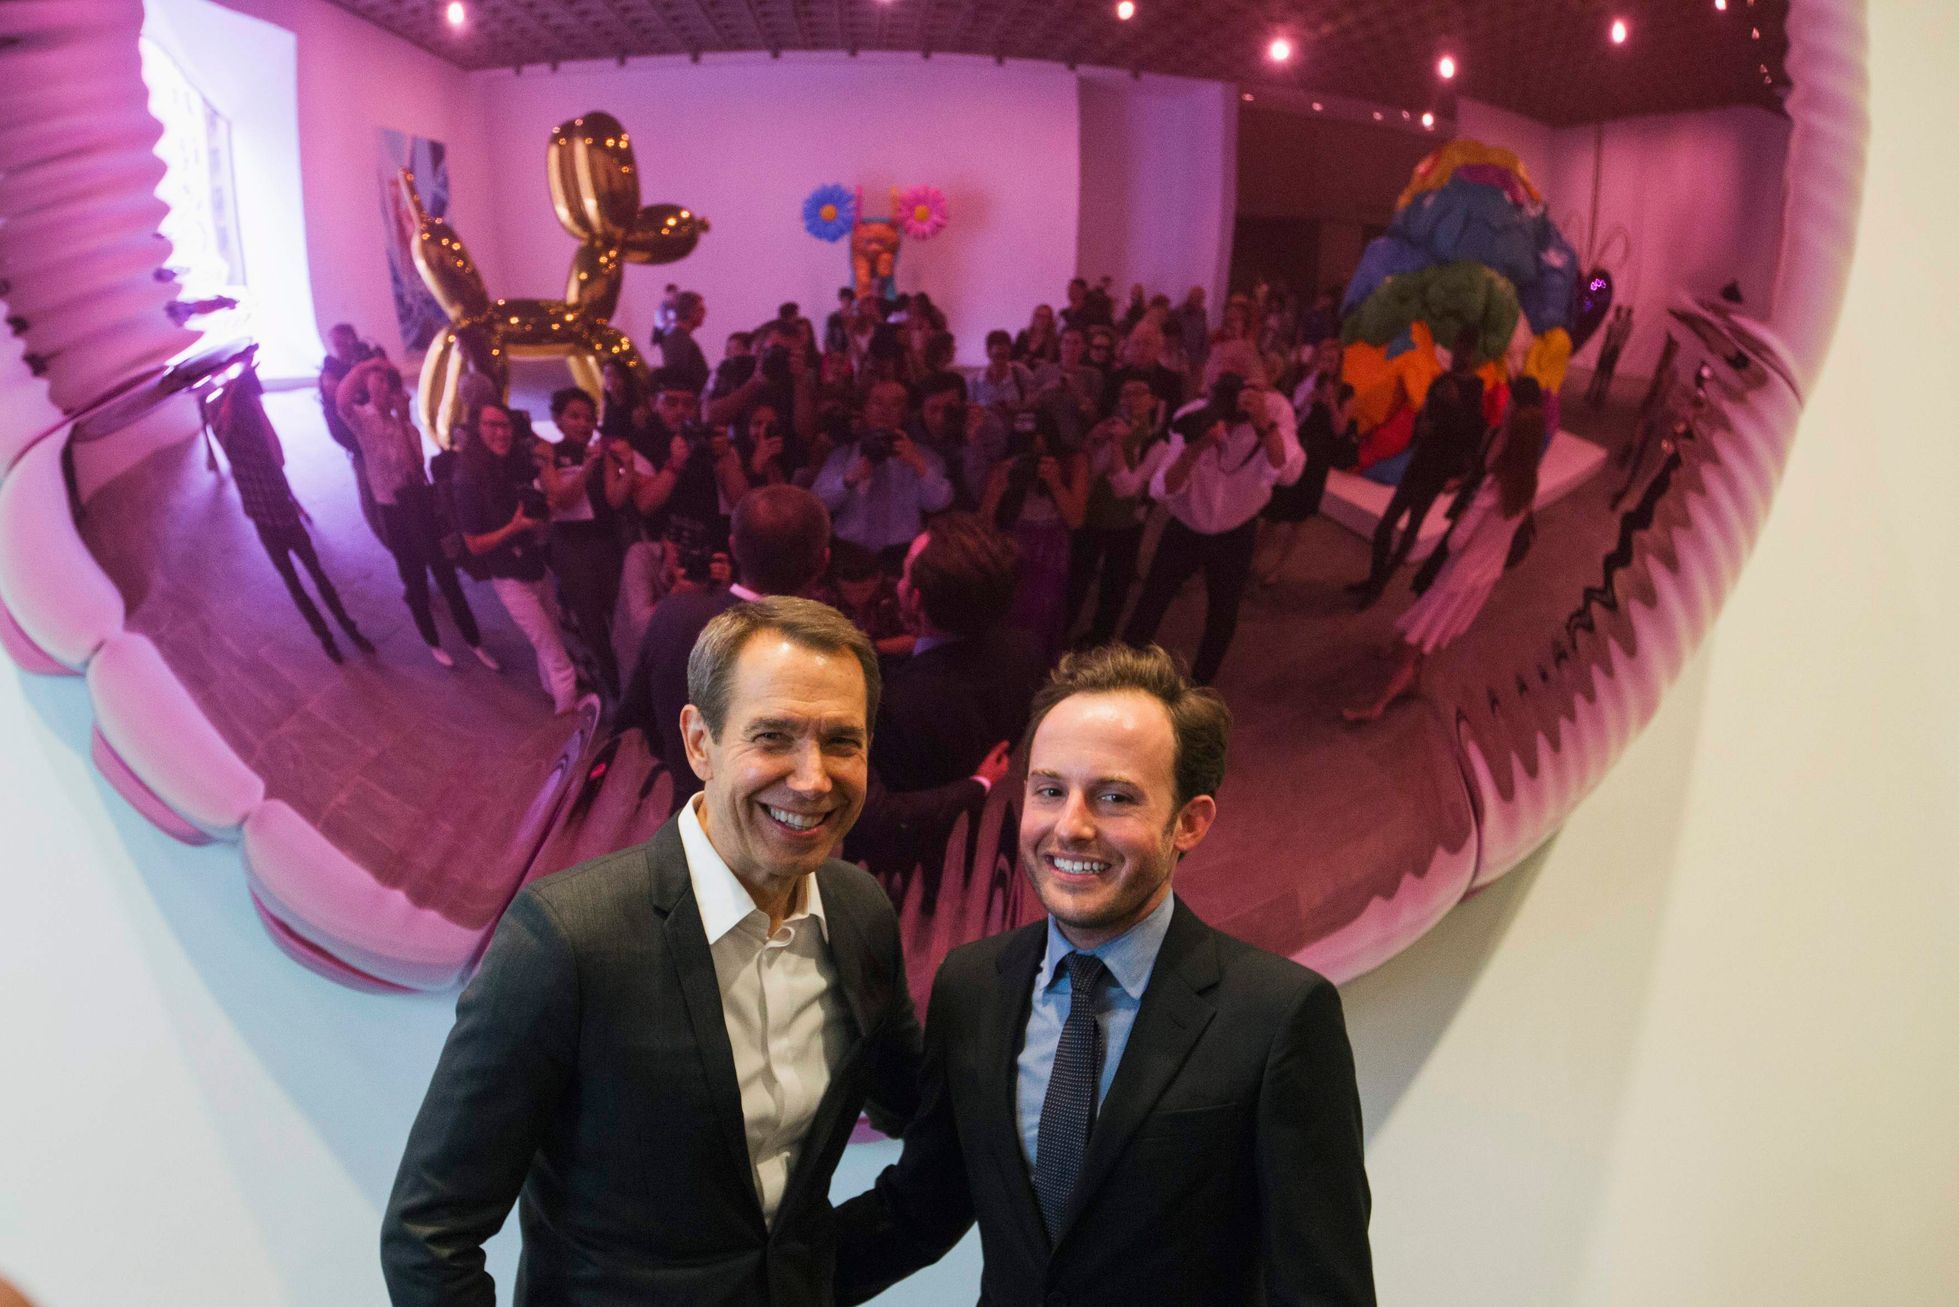 Artist Jeff Koons poses with Scott Rothkopf, the associate director of programs at the Whitney, at the Whitney Museum of American Art in New York